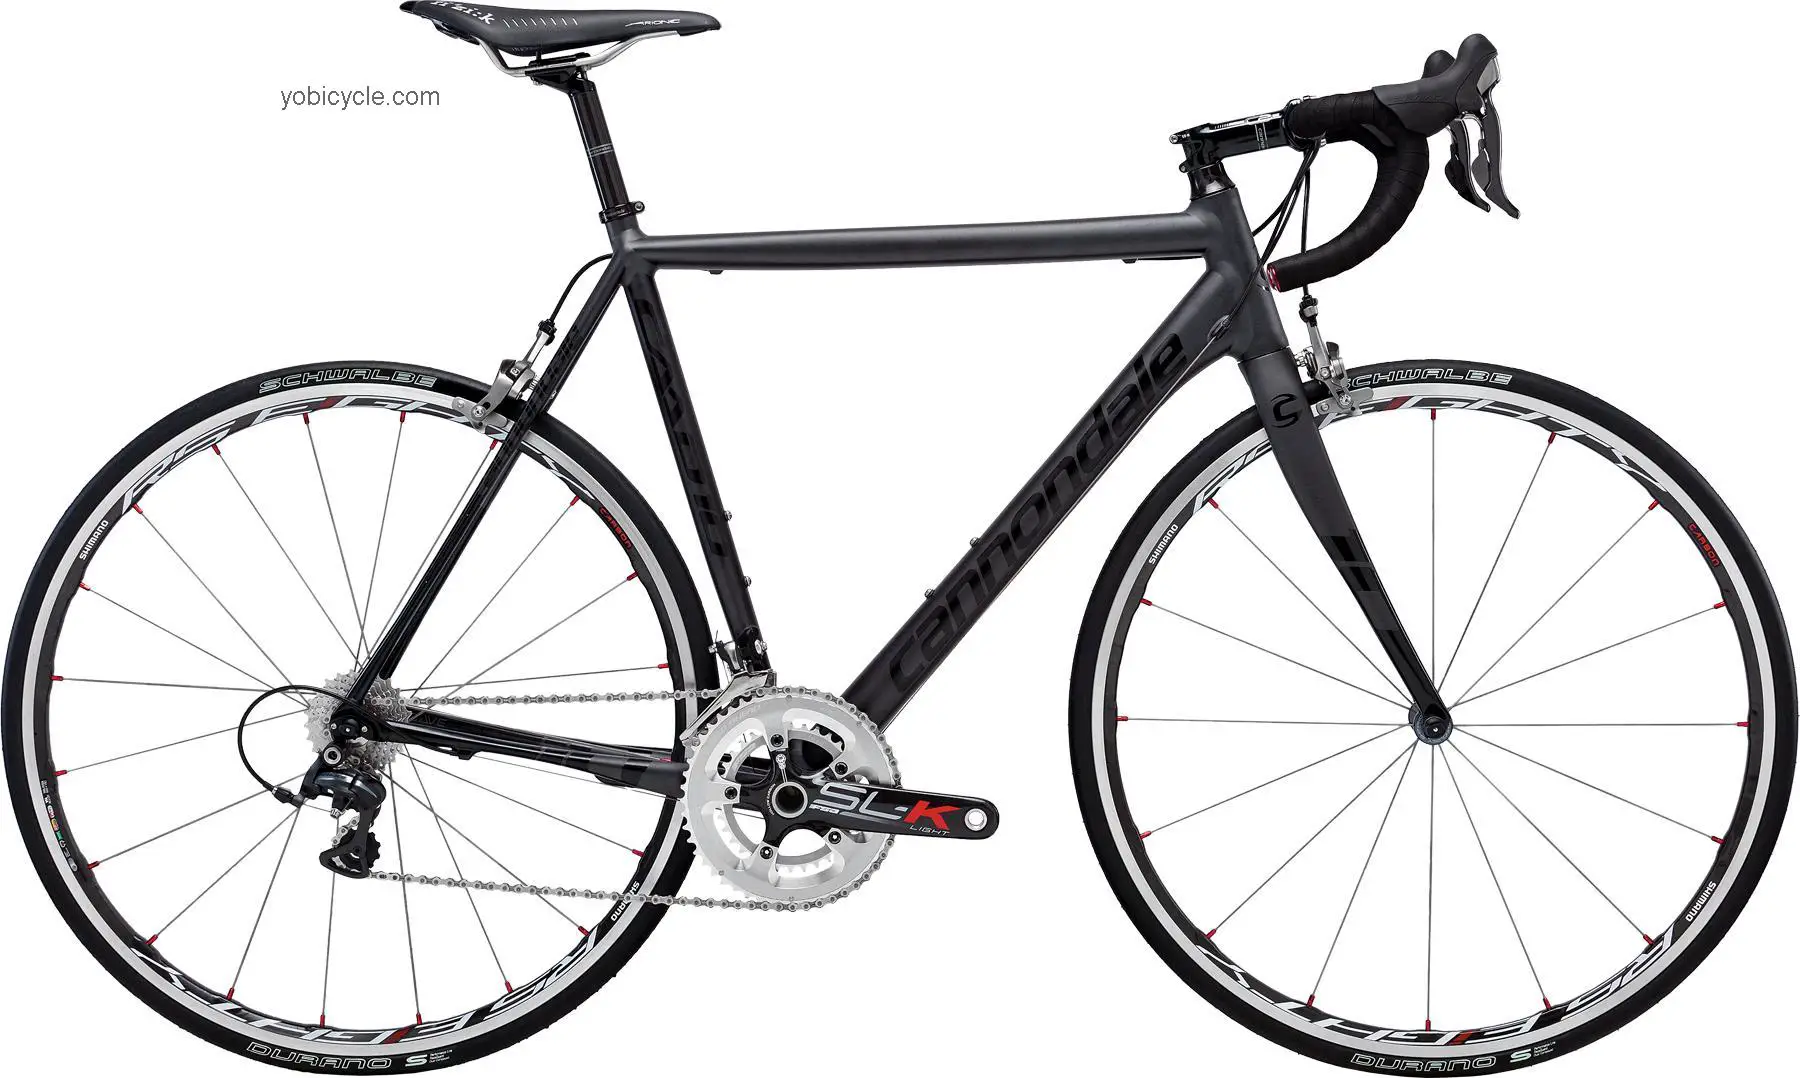 Cannondale  CAAD10 1 Dura-Ace Technical data and specifications